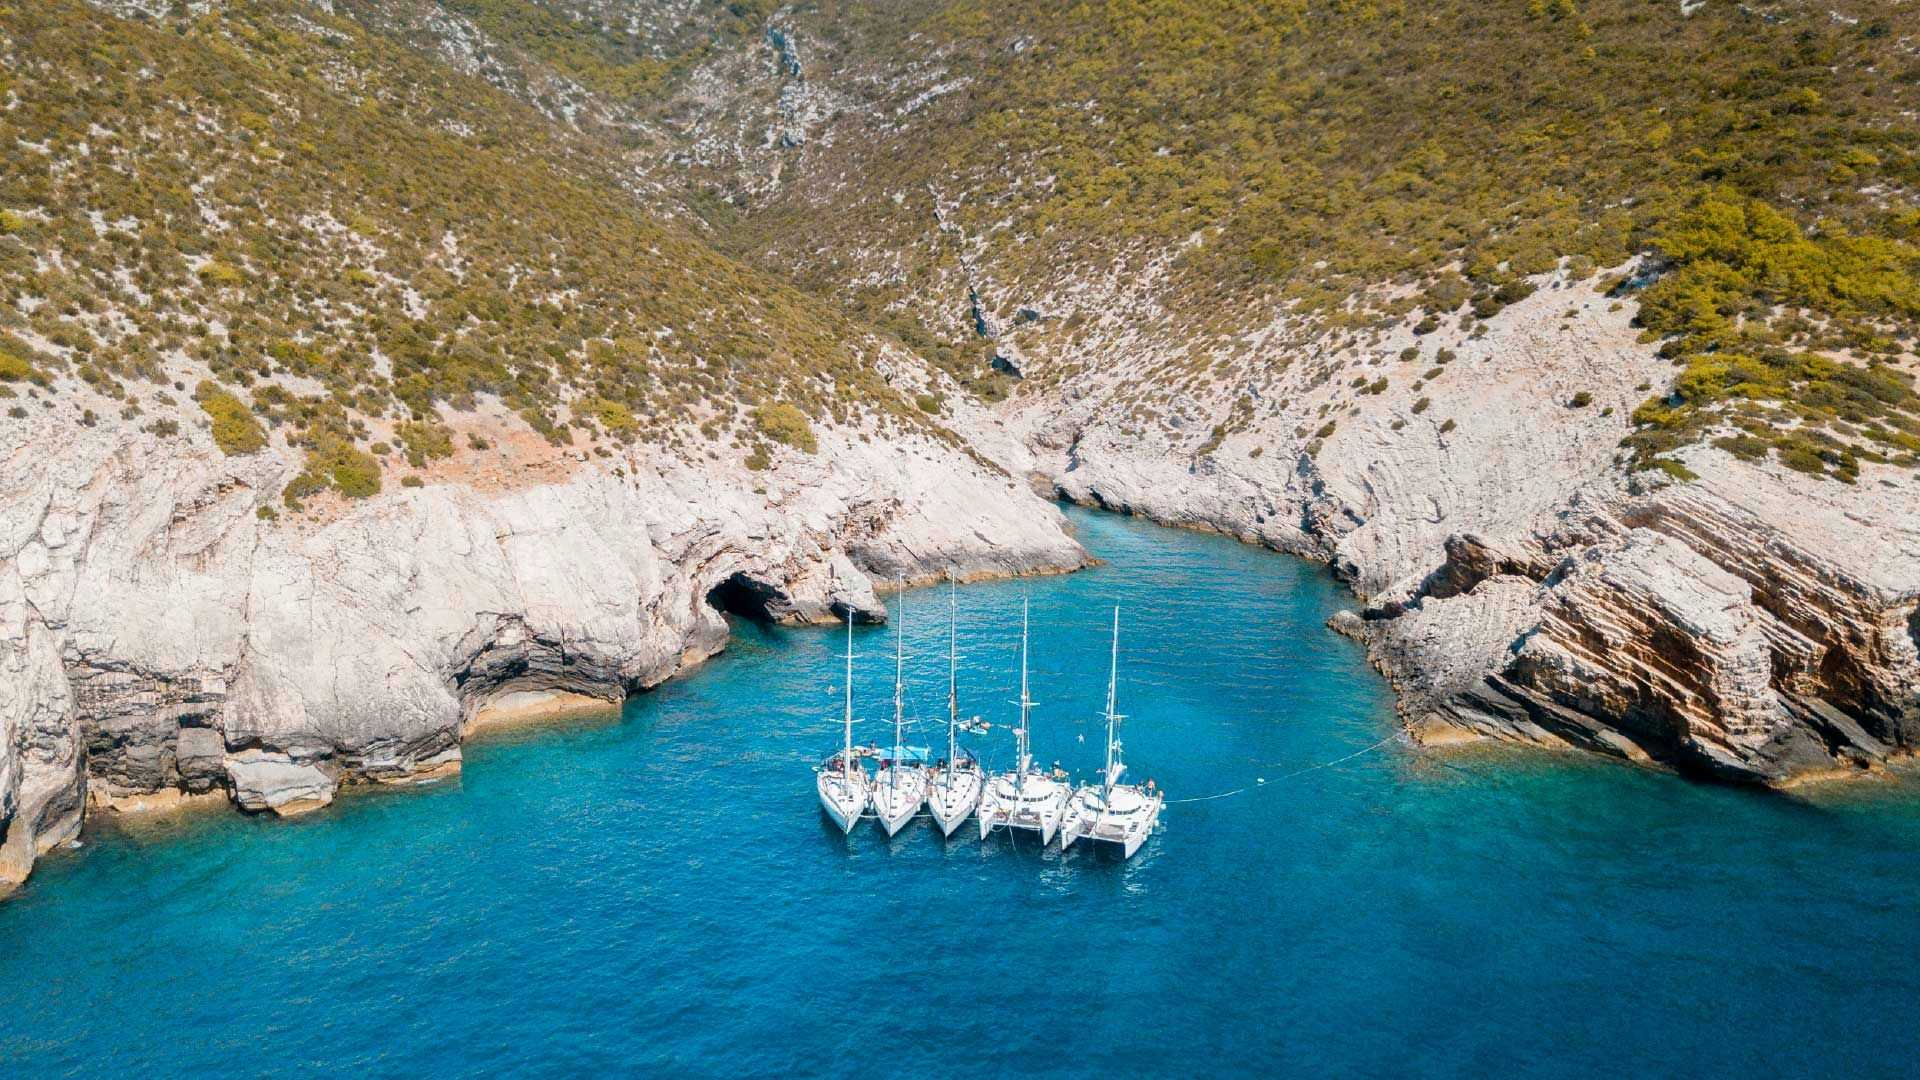 MedSailors yachts anchored together in Turkey